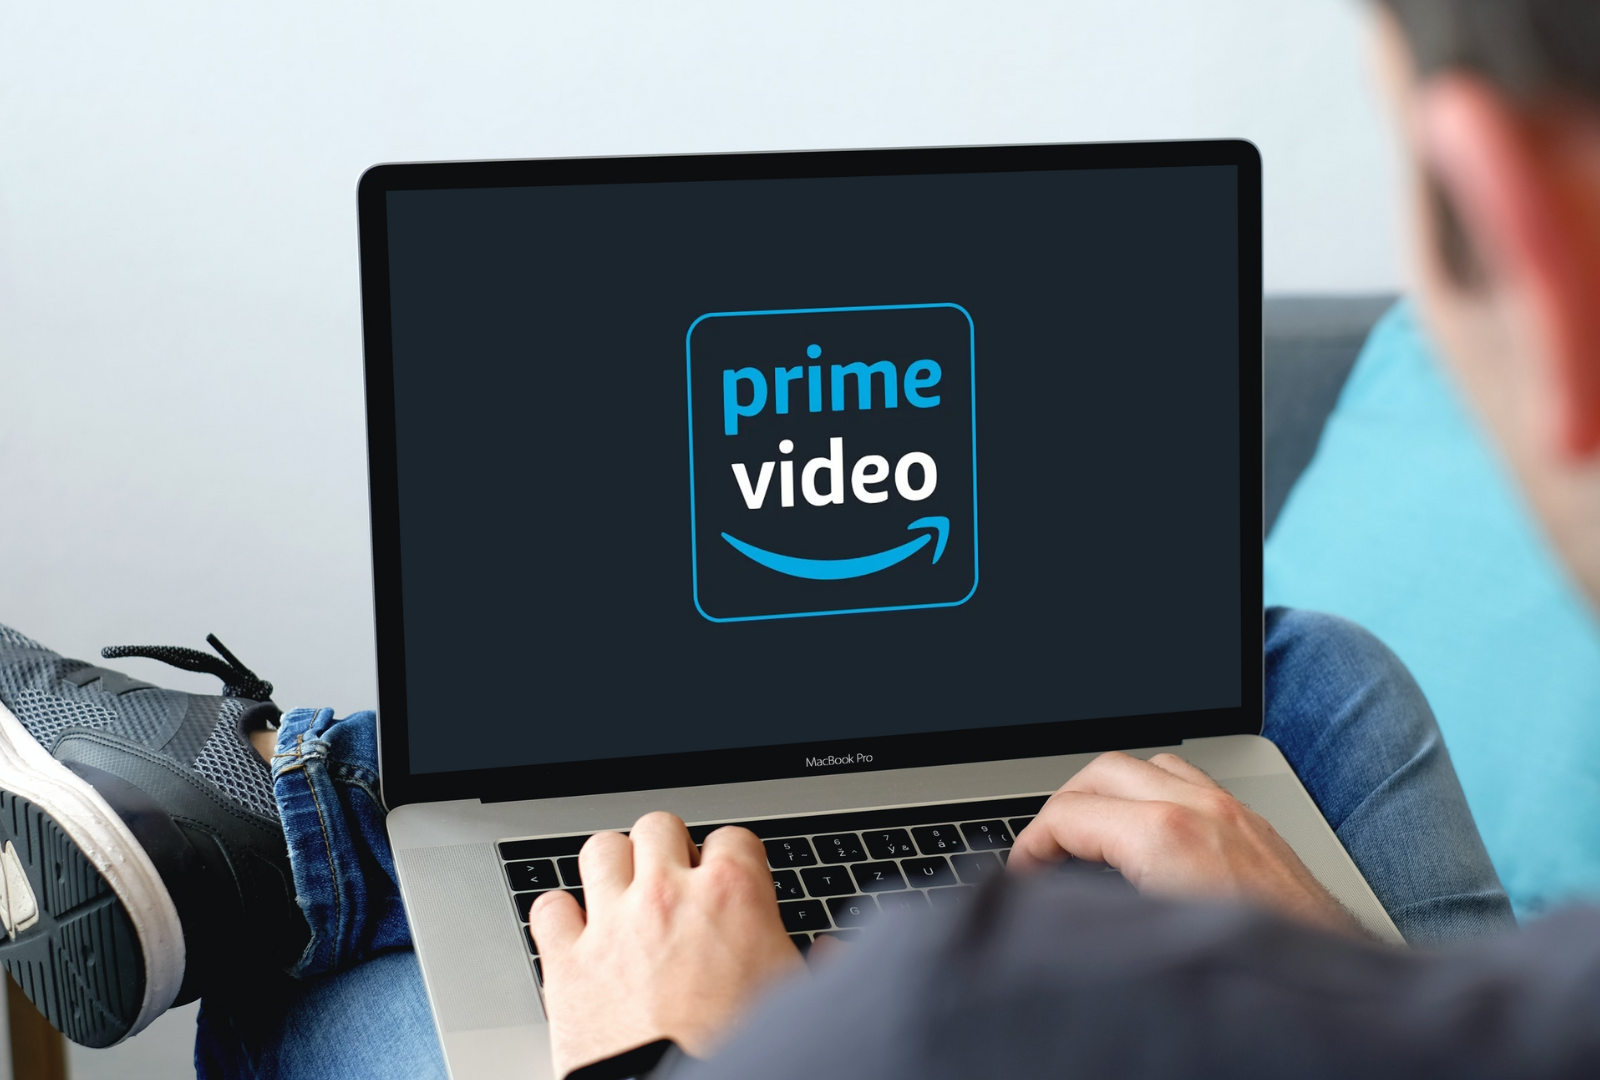 Here's why having an  Prime subscription is a good idea